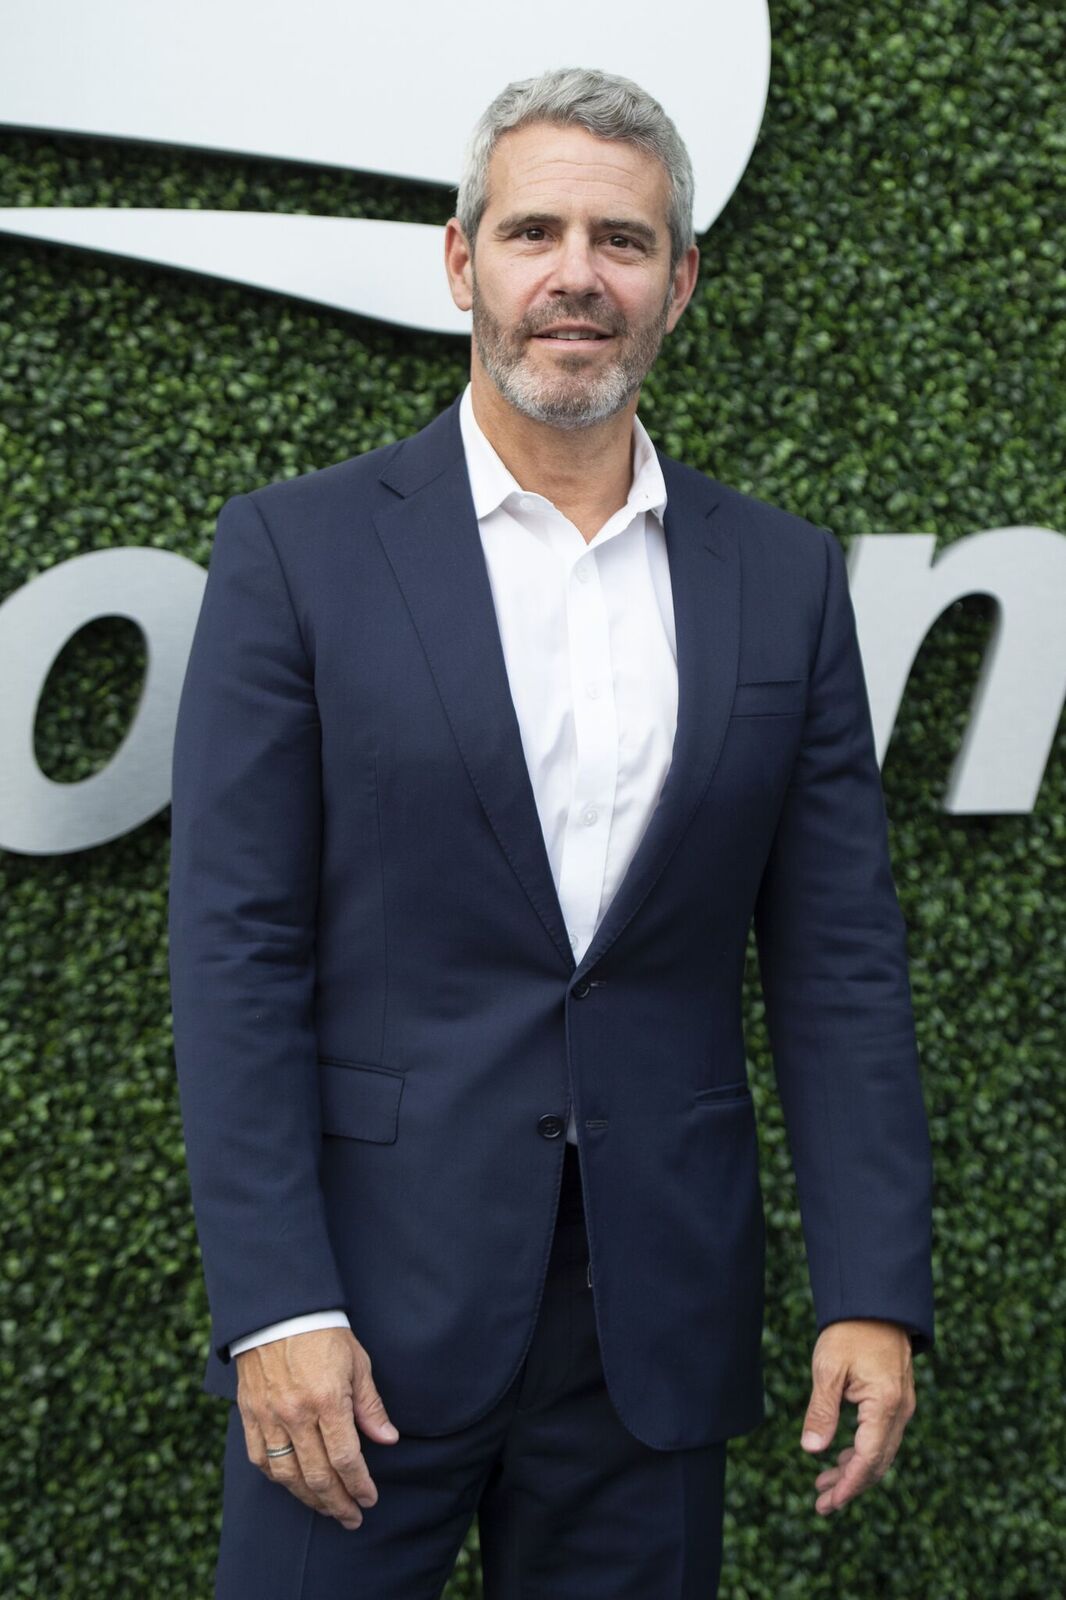 Andy Cohen at the US Open on September 5, 2019, in New York City | Photo: Adrian Edwards/GC Images/Getty images